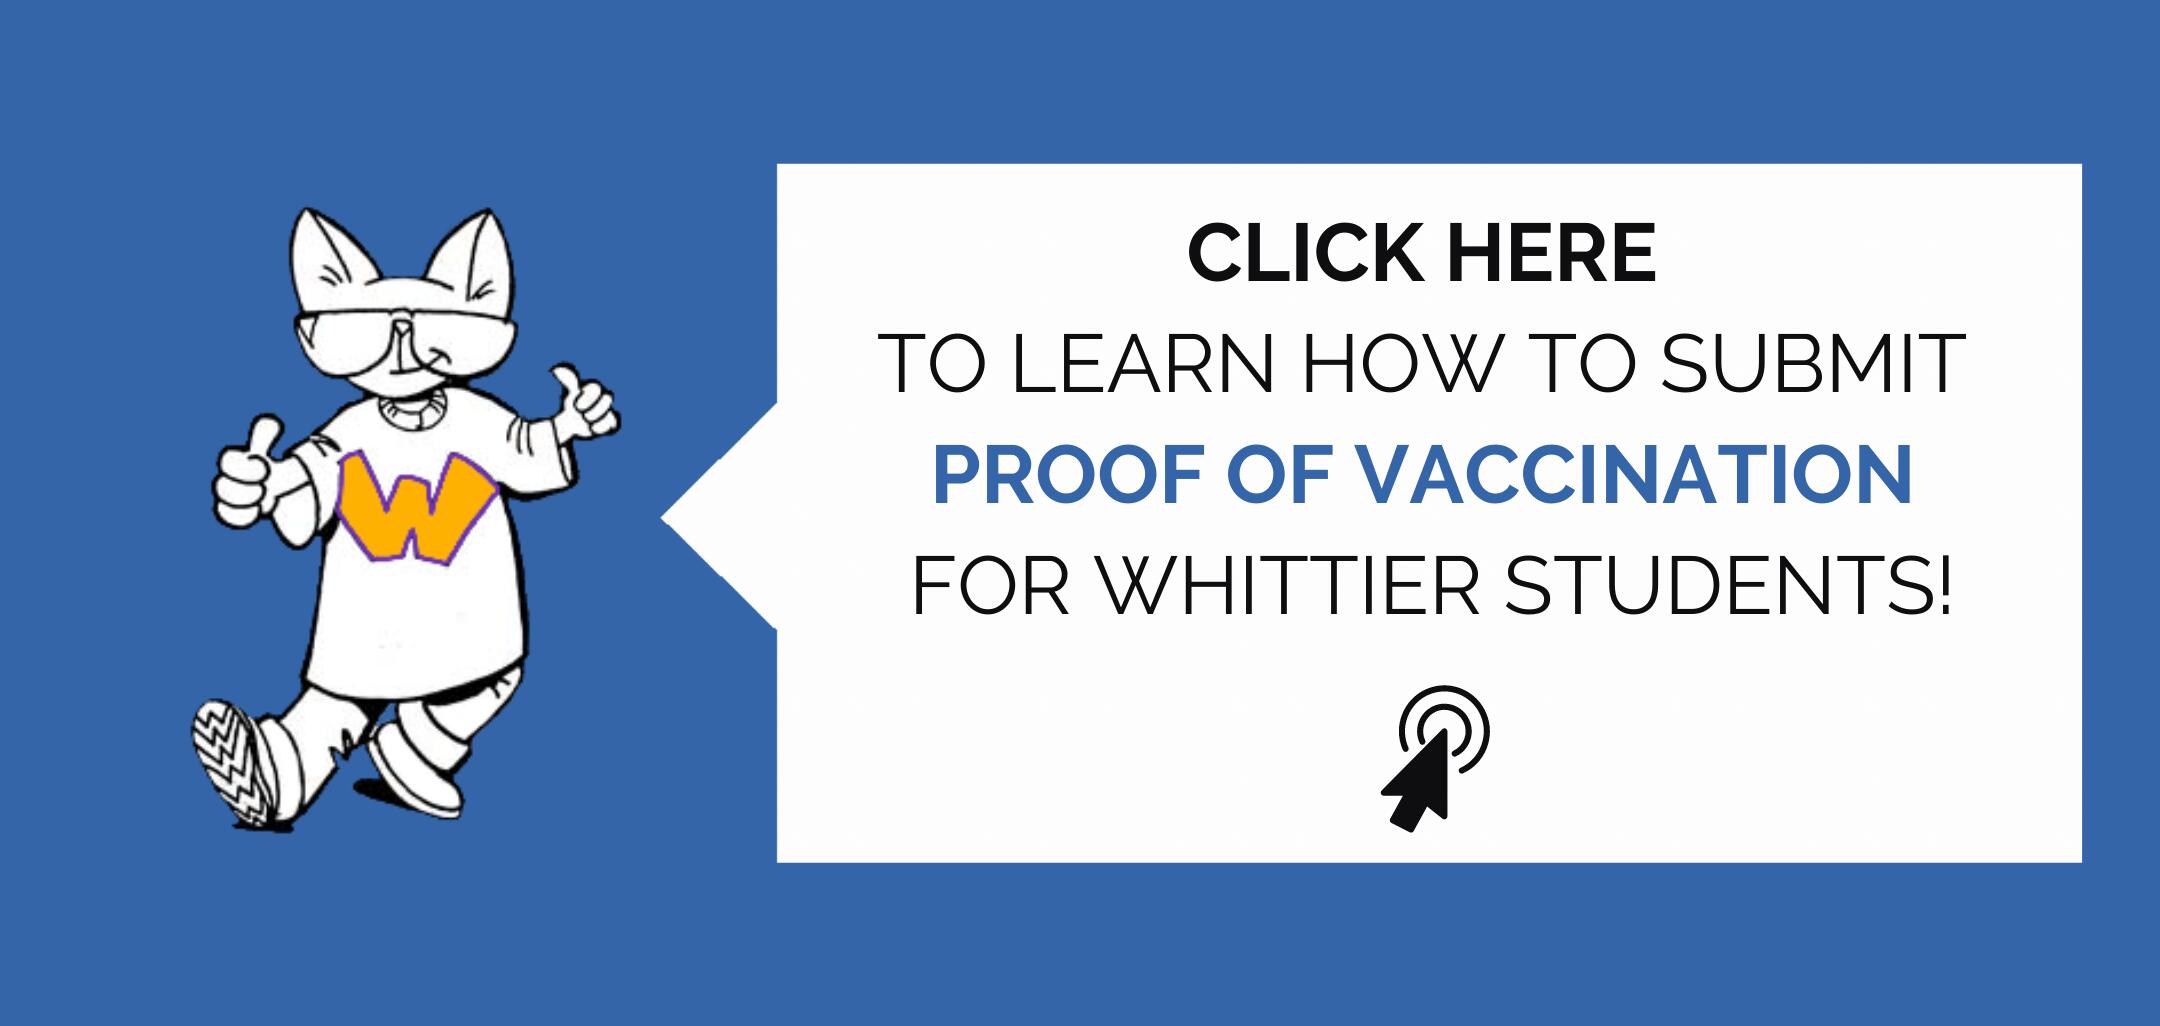 Click here to learn how to submit proof of vaccination for Whittier students